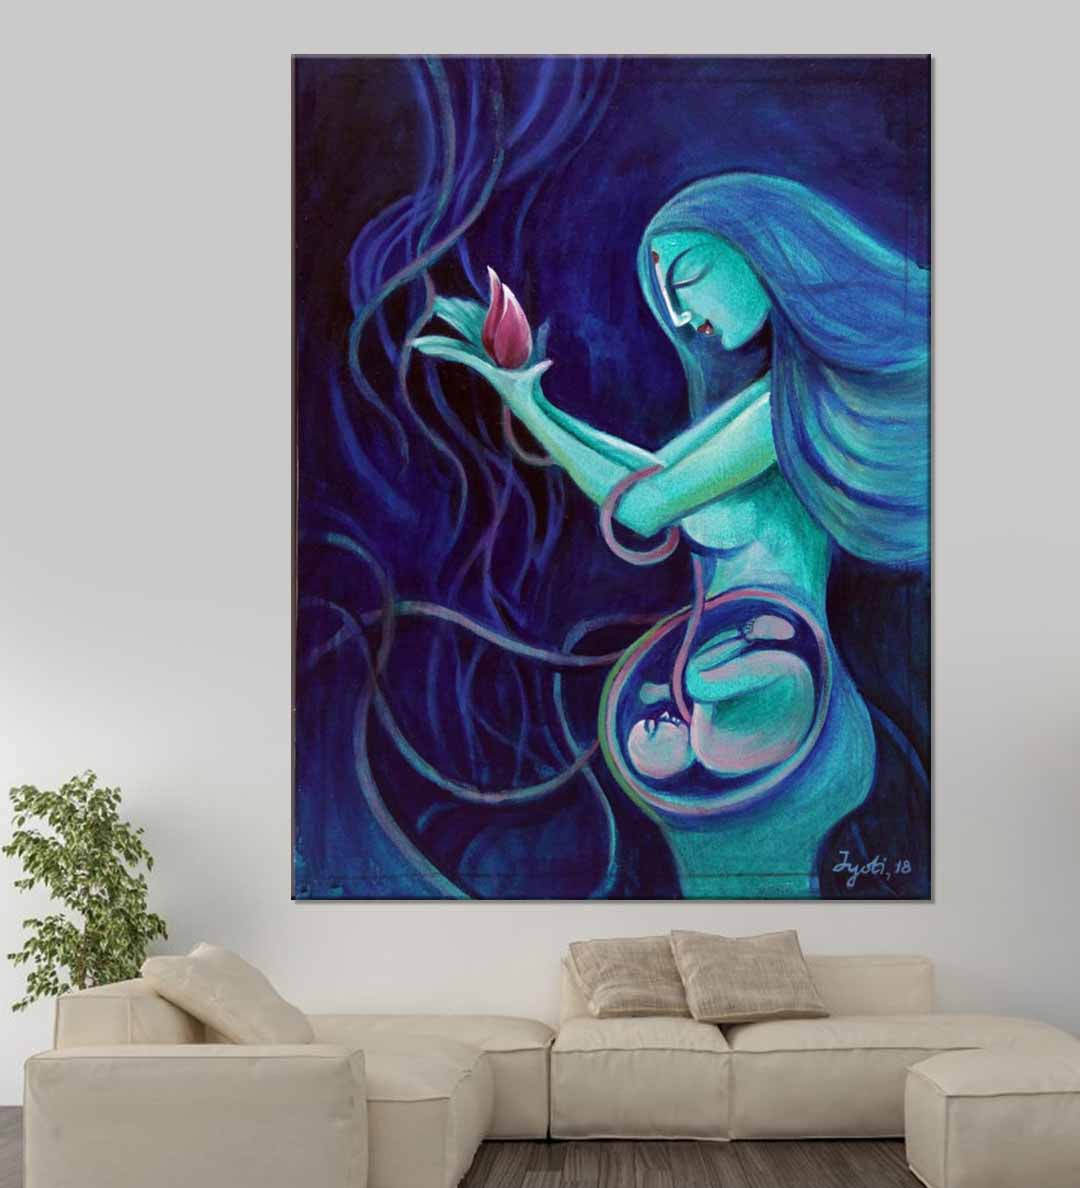 Whispers in the Womb - Wall Decor - 1